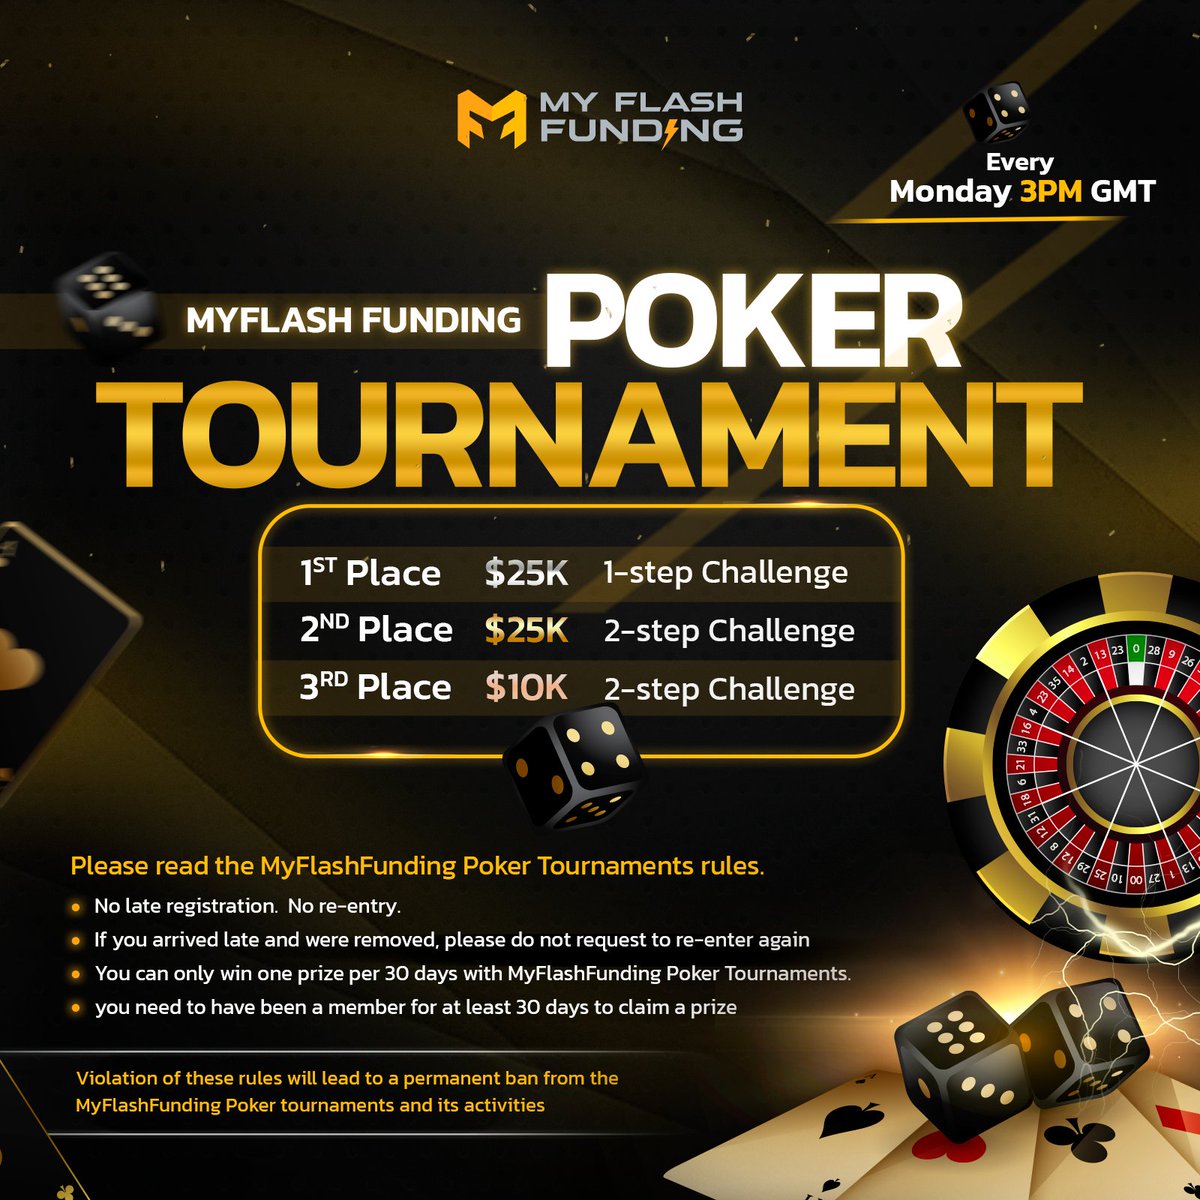 Join us for the poker tournament every Monday at 3pm GMT. We have 3 challenge accounts up for grabs, ranging in size from 25k to 10k. Set your reminder and join now! 👉 discord.gg/myflashfunding